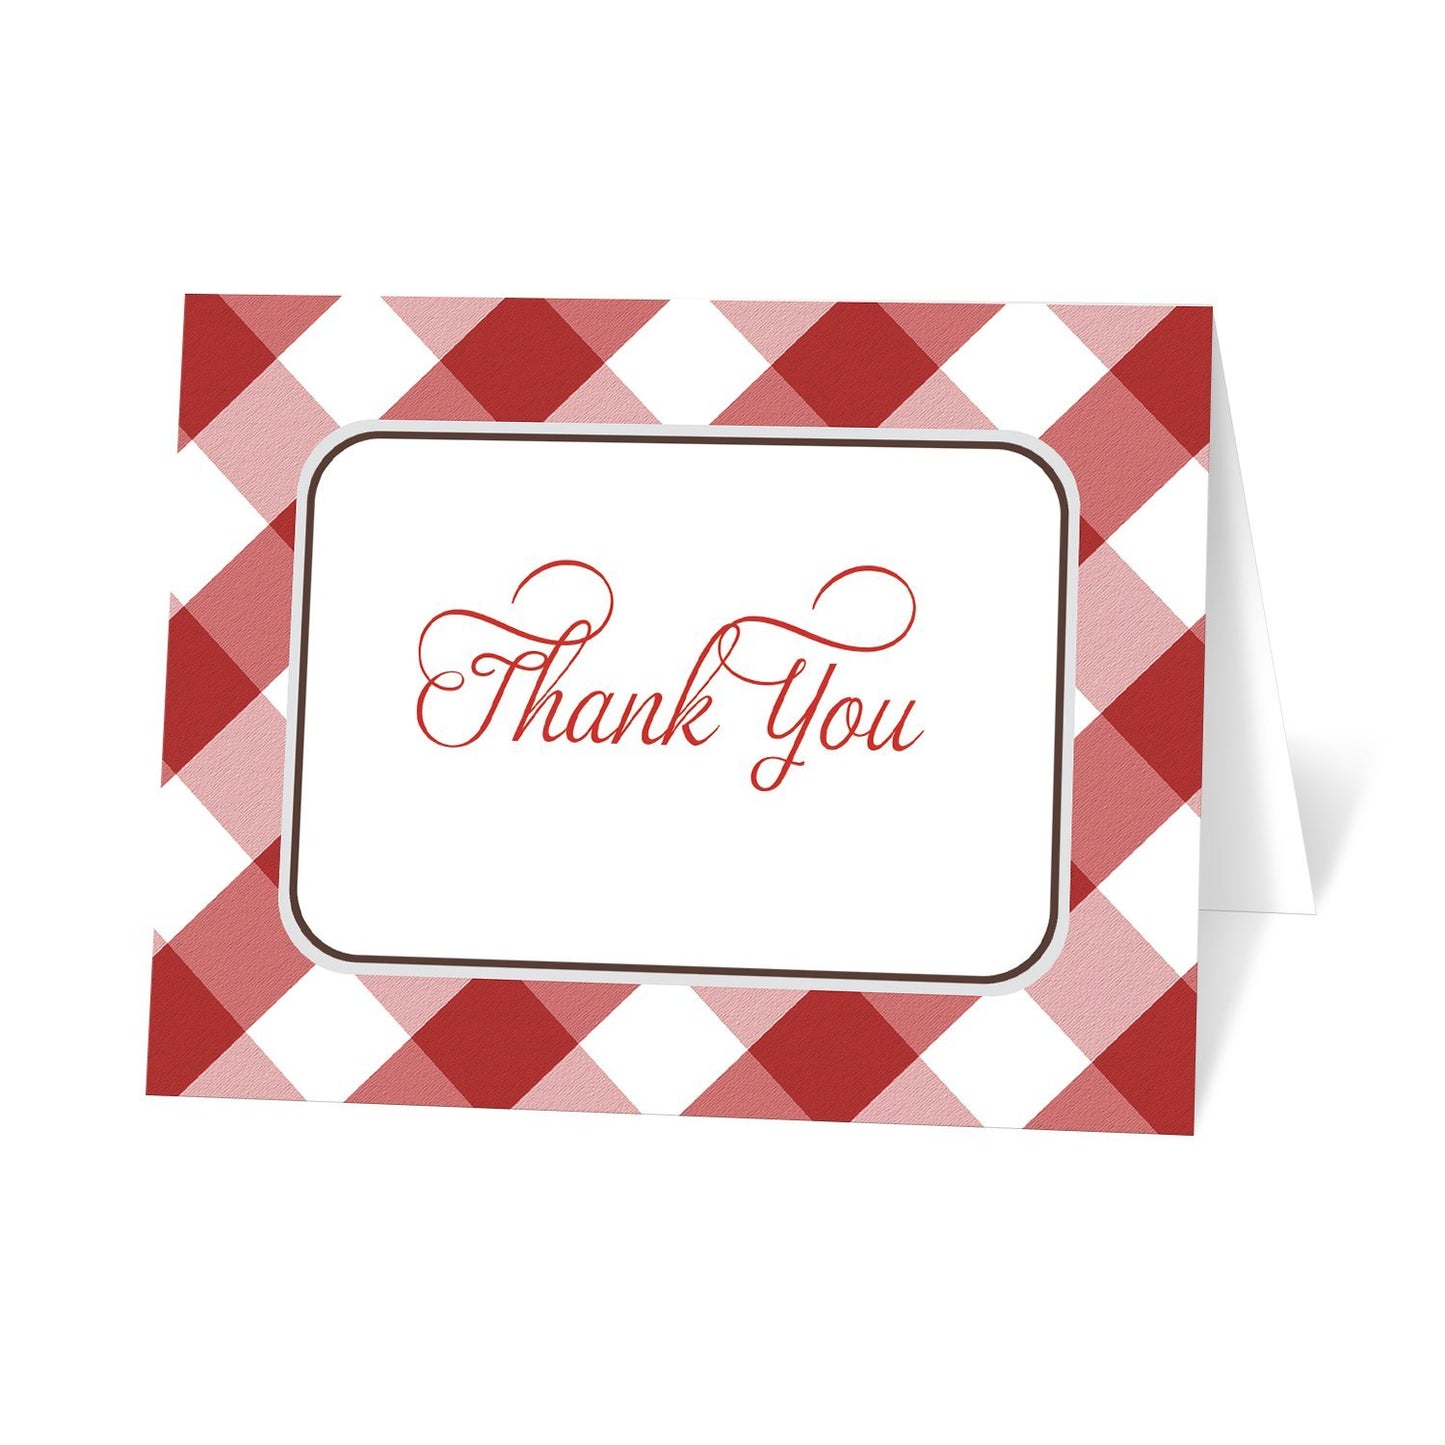 Red Gingham Thank You Cards at Artistically Invited in a red and white gingham pattern